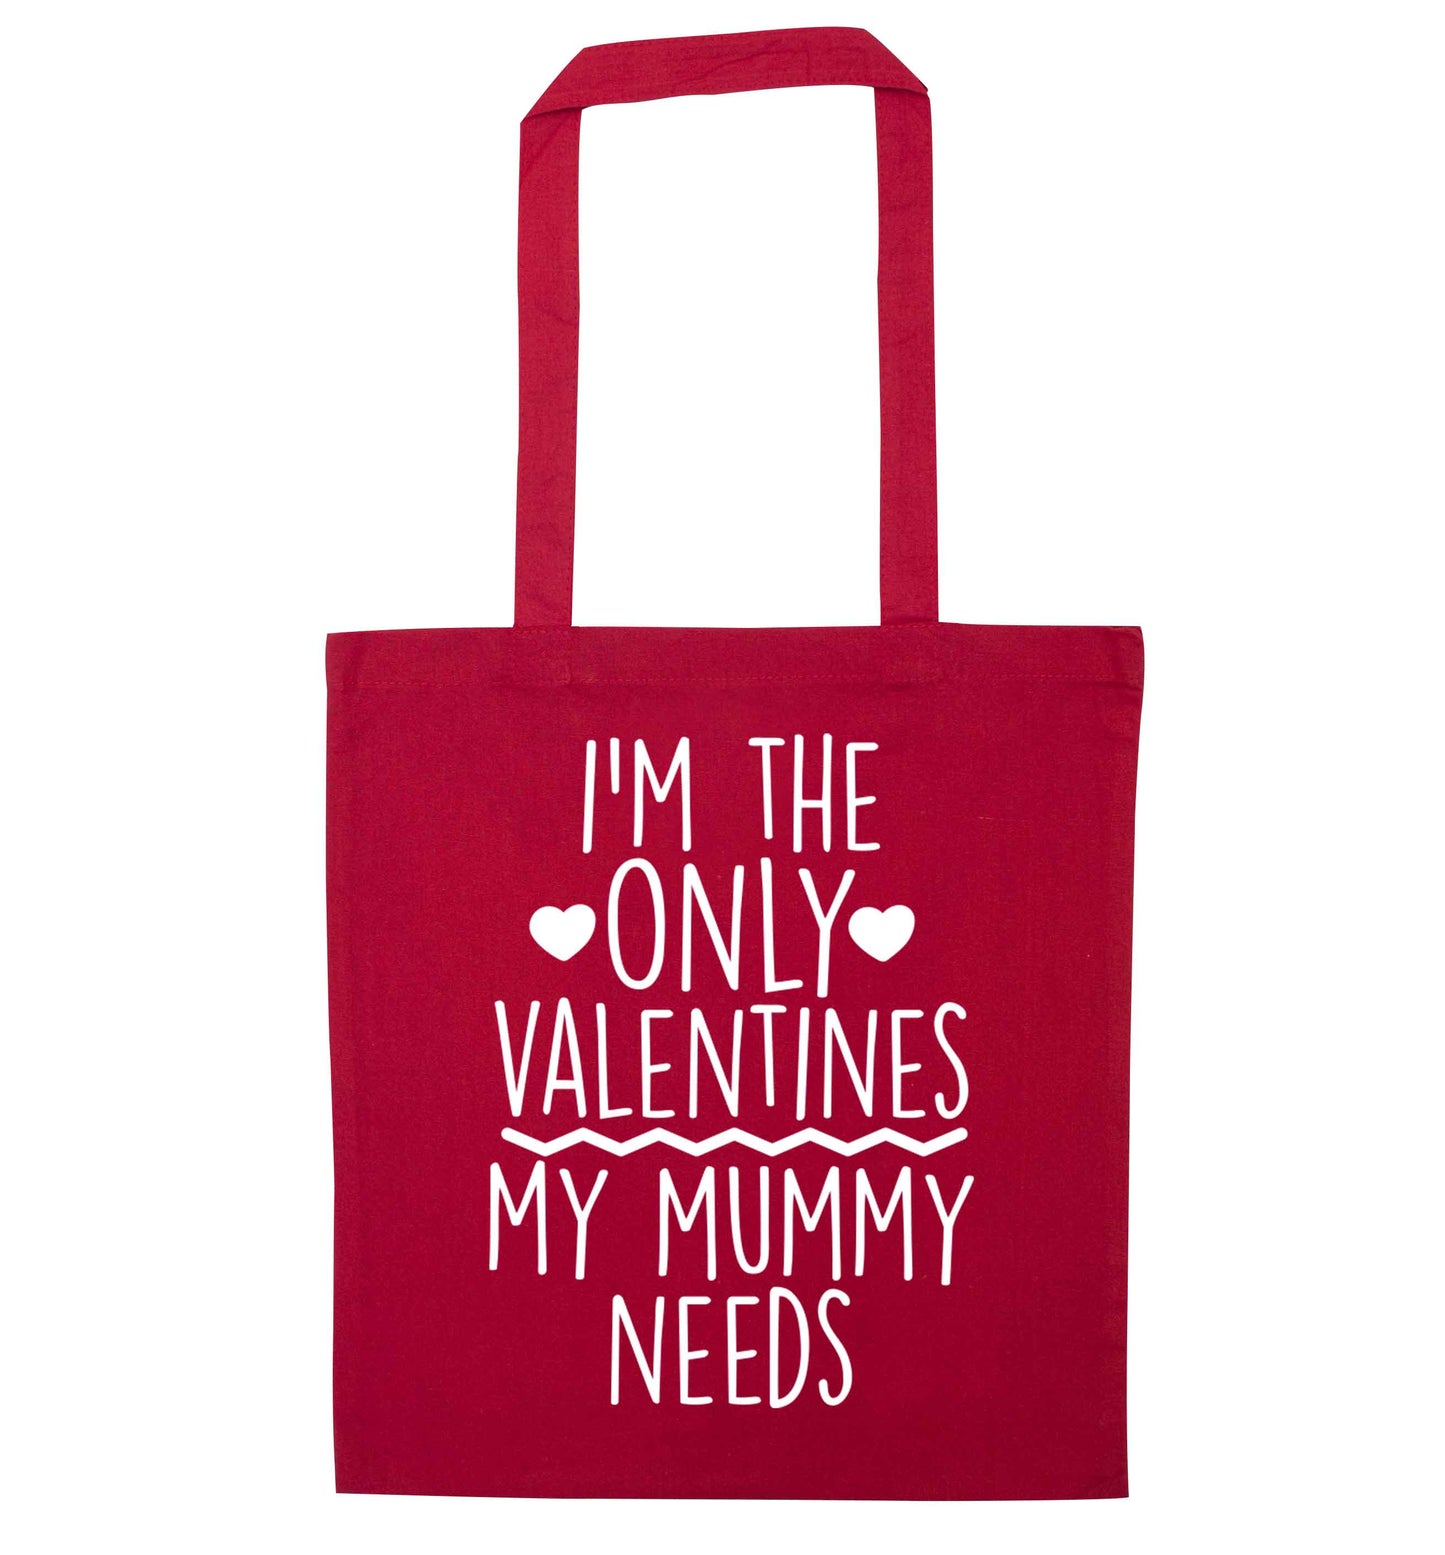 I'm the only valentines my mummy needs red tote bag